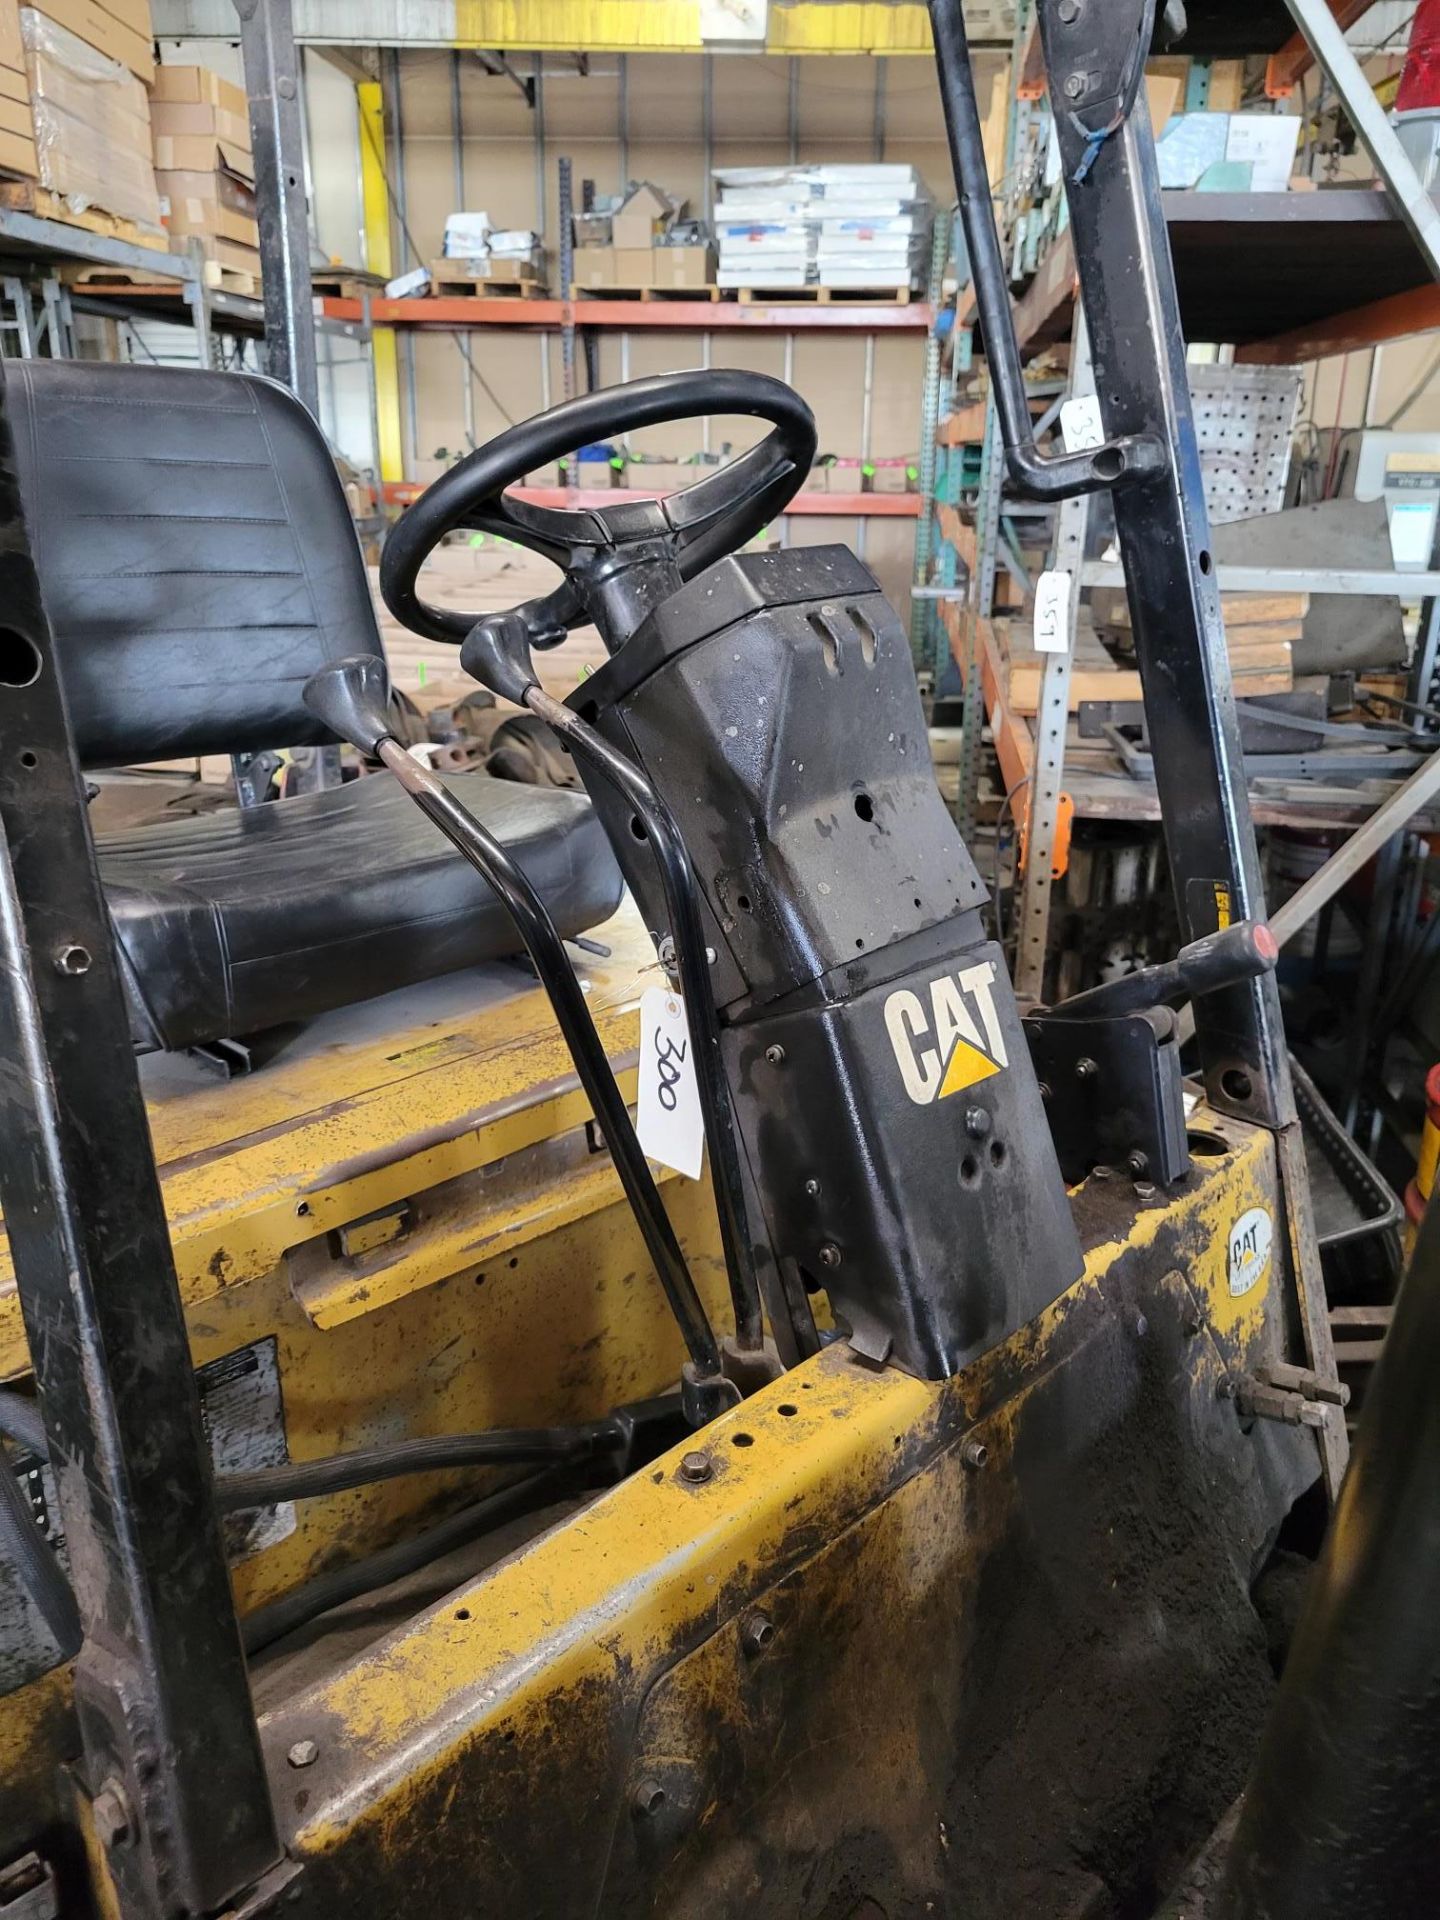 Caterpillar forklift 4500 lbs capacity - Image 2 of 25